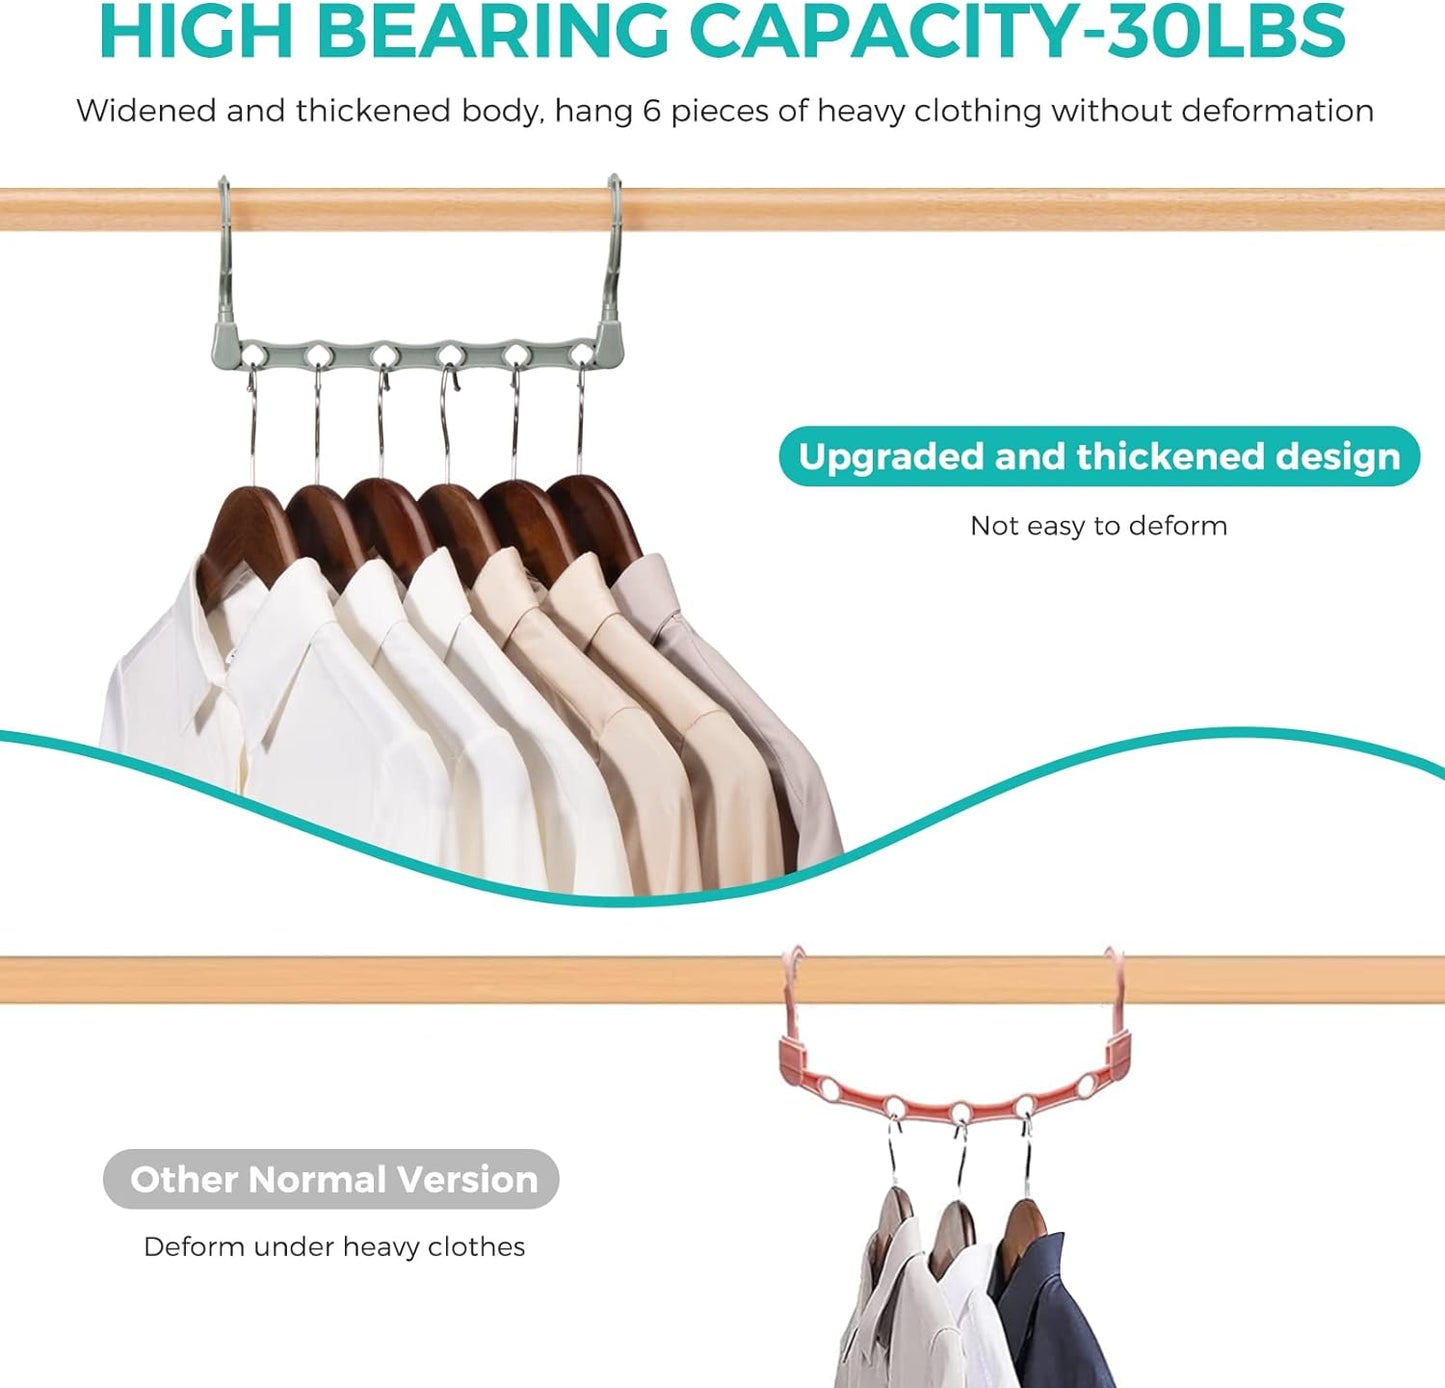 HOUSE DAY 9.5 Inch Space Saving Hangers for Clothes Gray 20 Pack